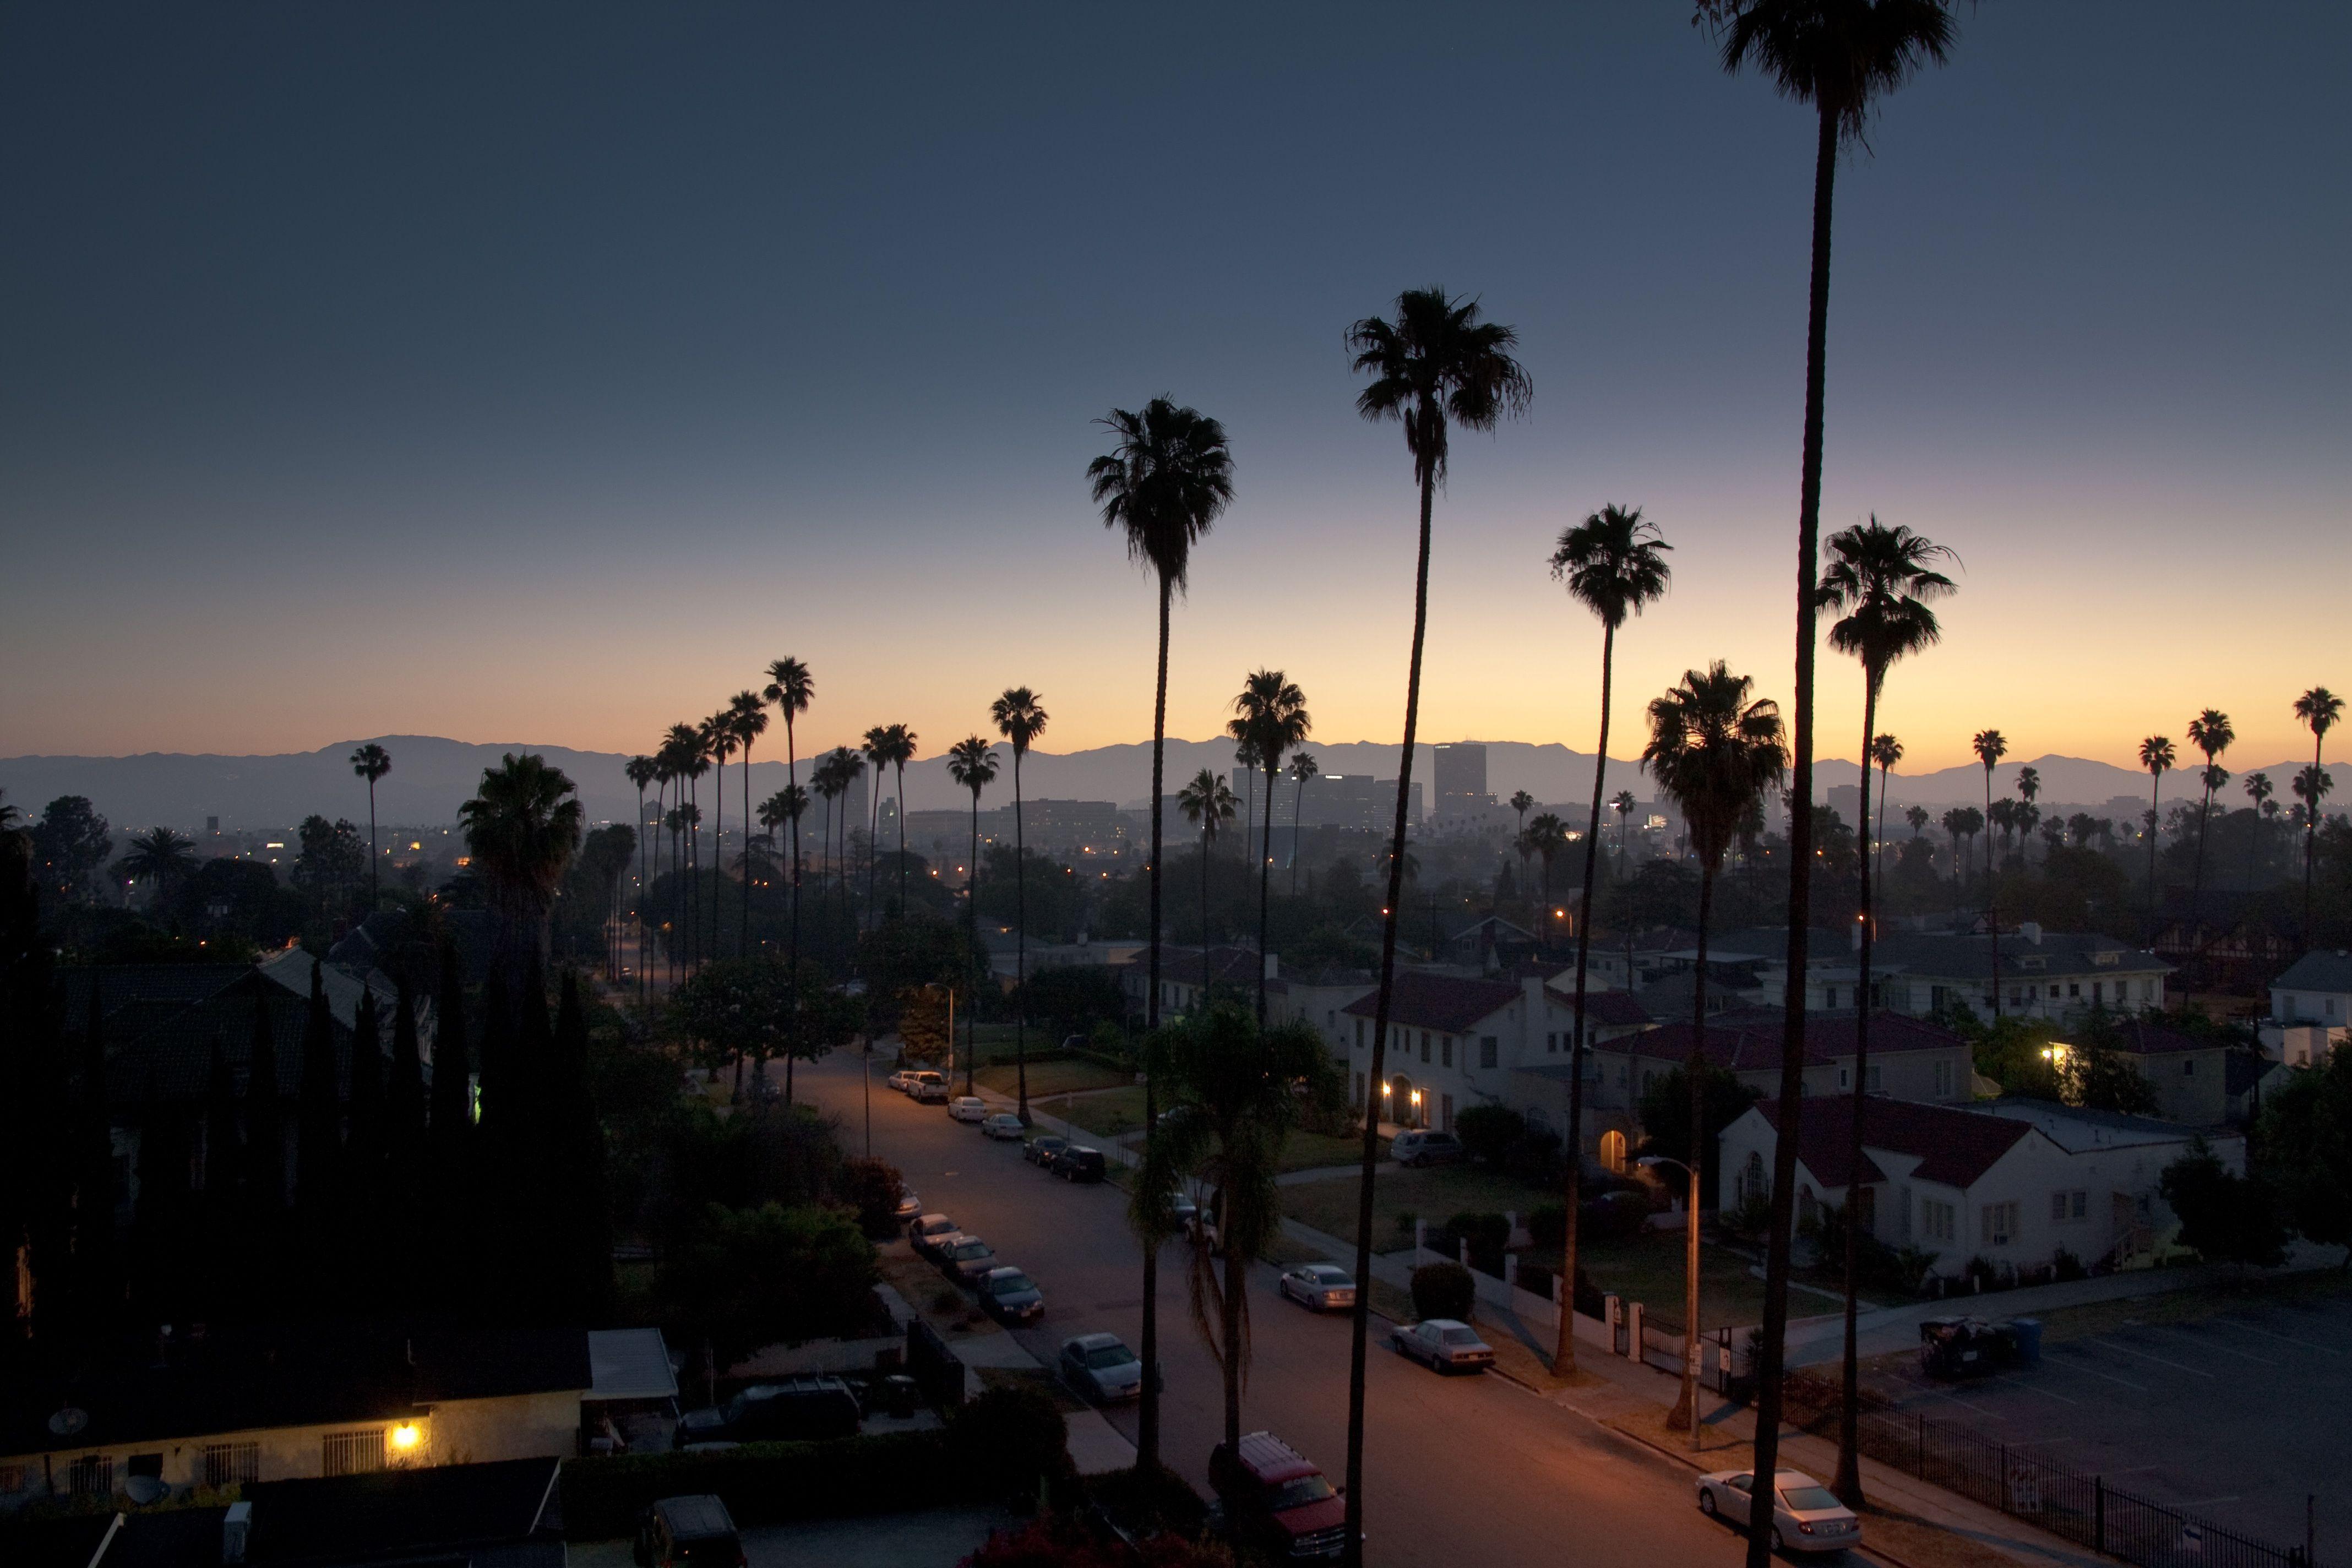 Los Angeles Wallpapers Top Free Los Angeles Backgrounds Wallpaperaccess